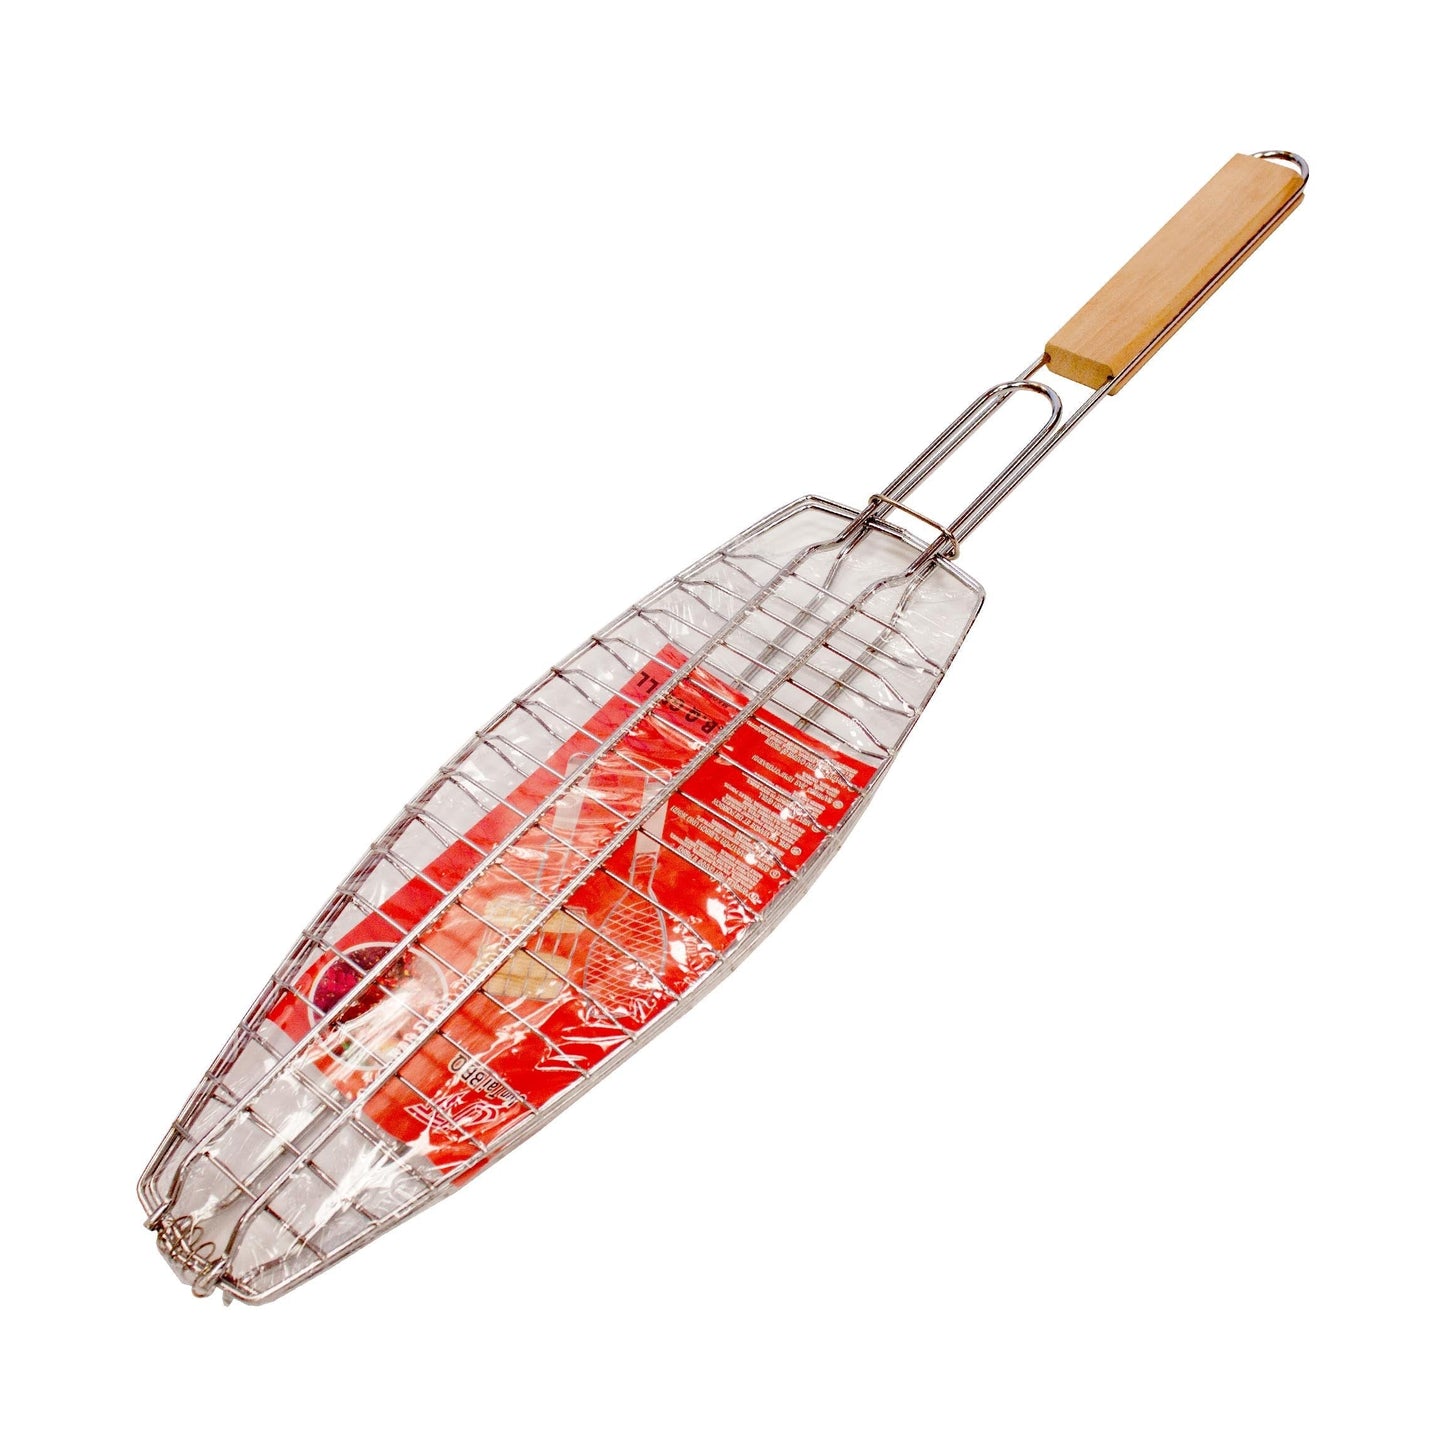 BBQ Metal Meat Fish Roasting Grilling Basket with Wooden Handle 15 x 43 cm 1243 / 9997 (Parcel Rate)